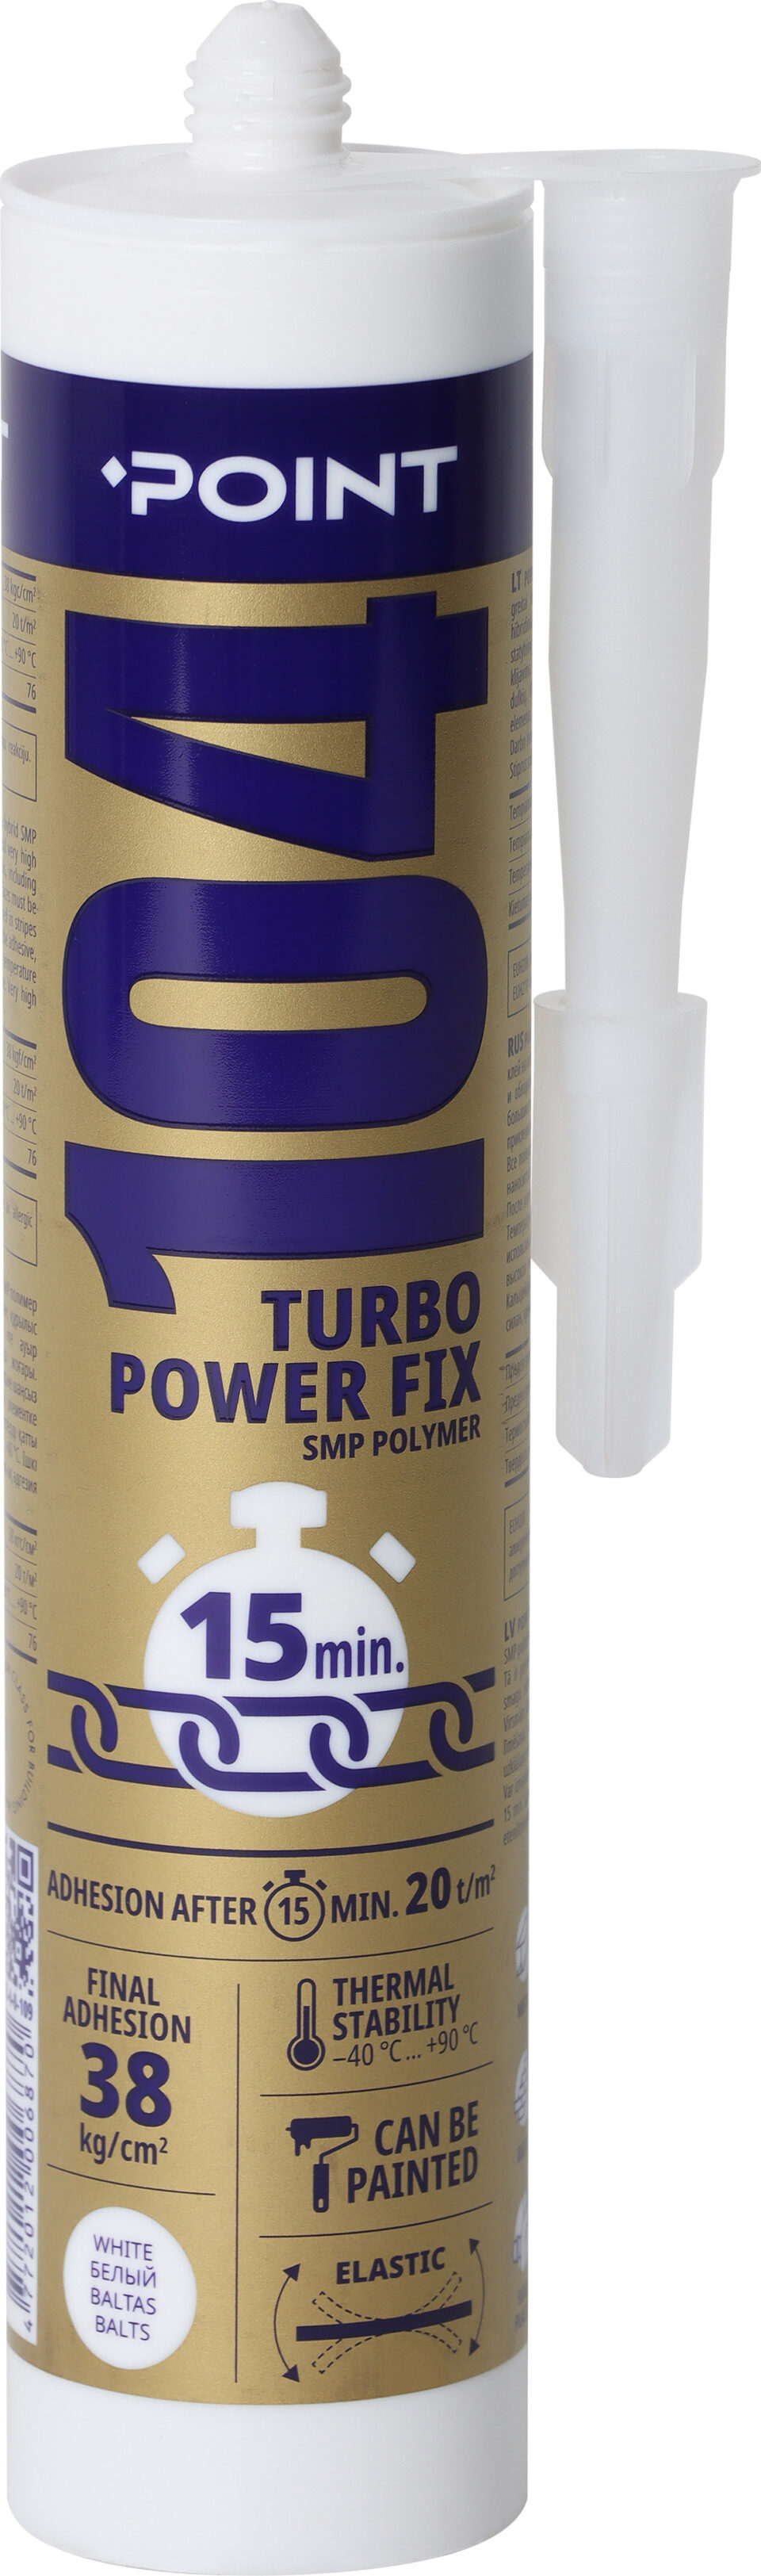 104 TURBO FAST&STRONG FIX extremely fast and strong hybrid adhesive and sealant